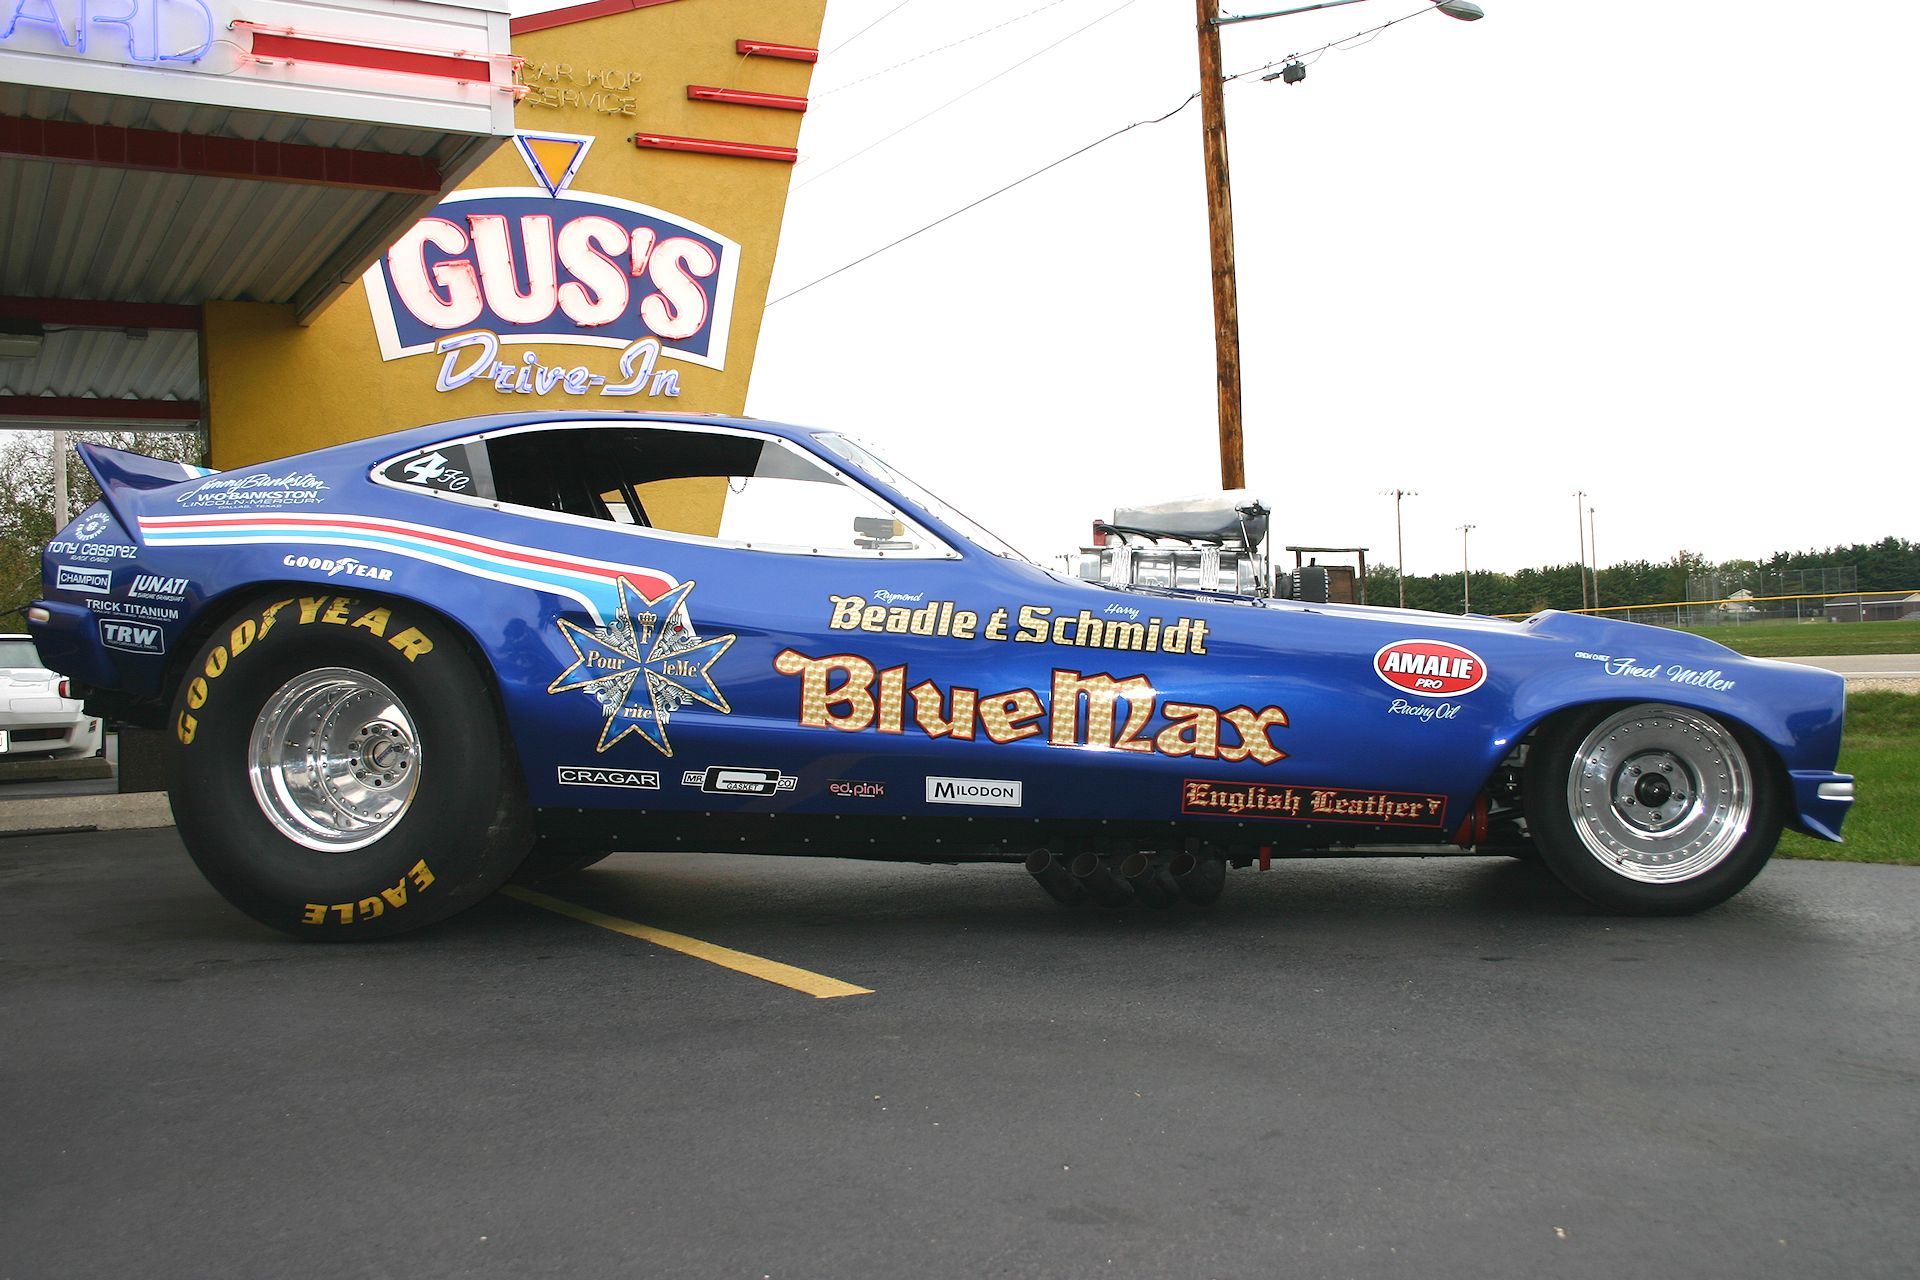 funnycar, Funny, Nhra, Drag, Racing, Race, Hot, Rod, Rods, Blue, Max, Ford, Mustang Wallpaper